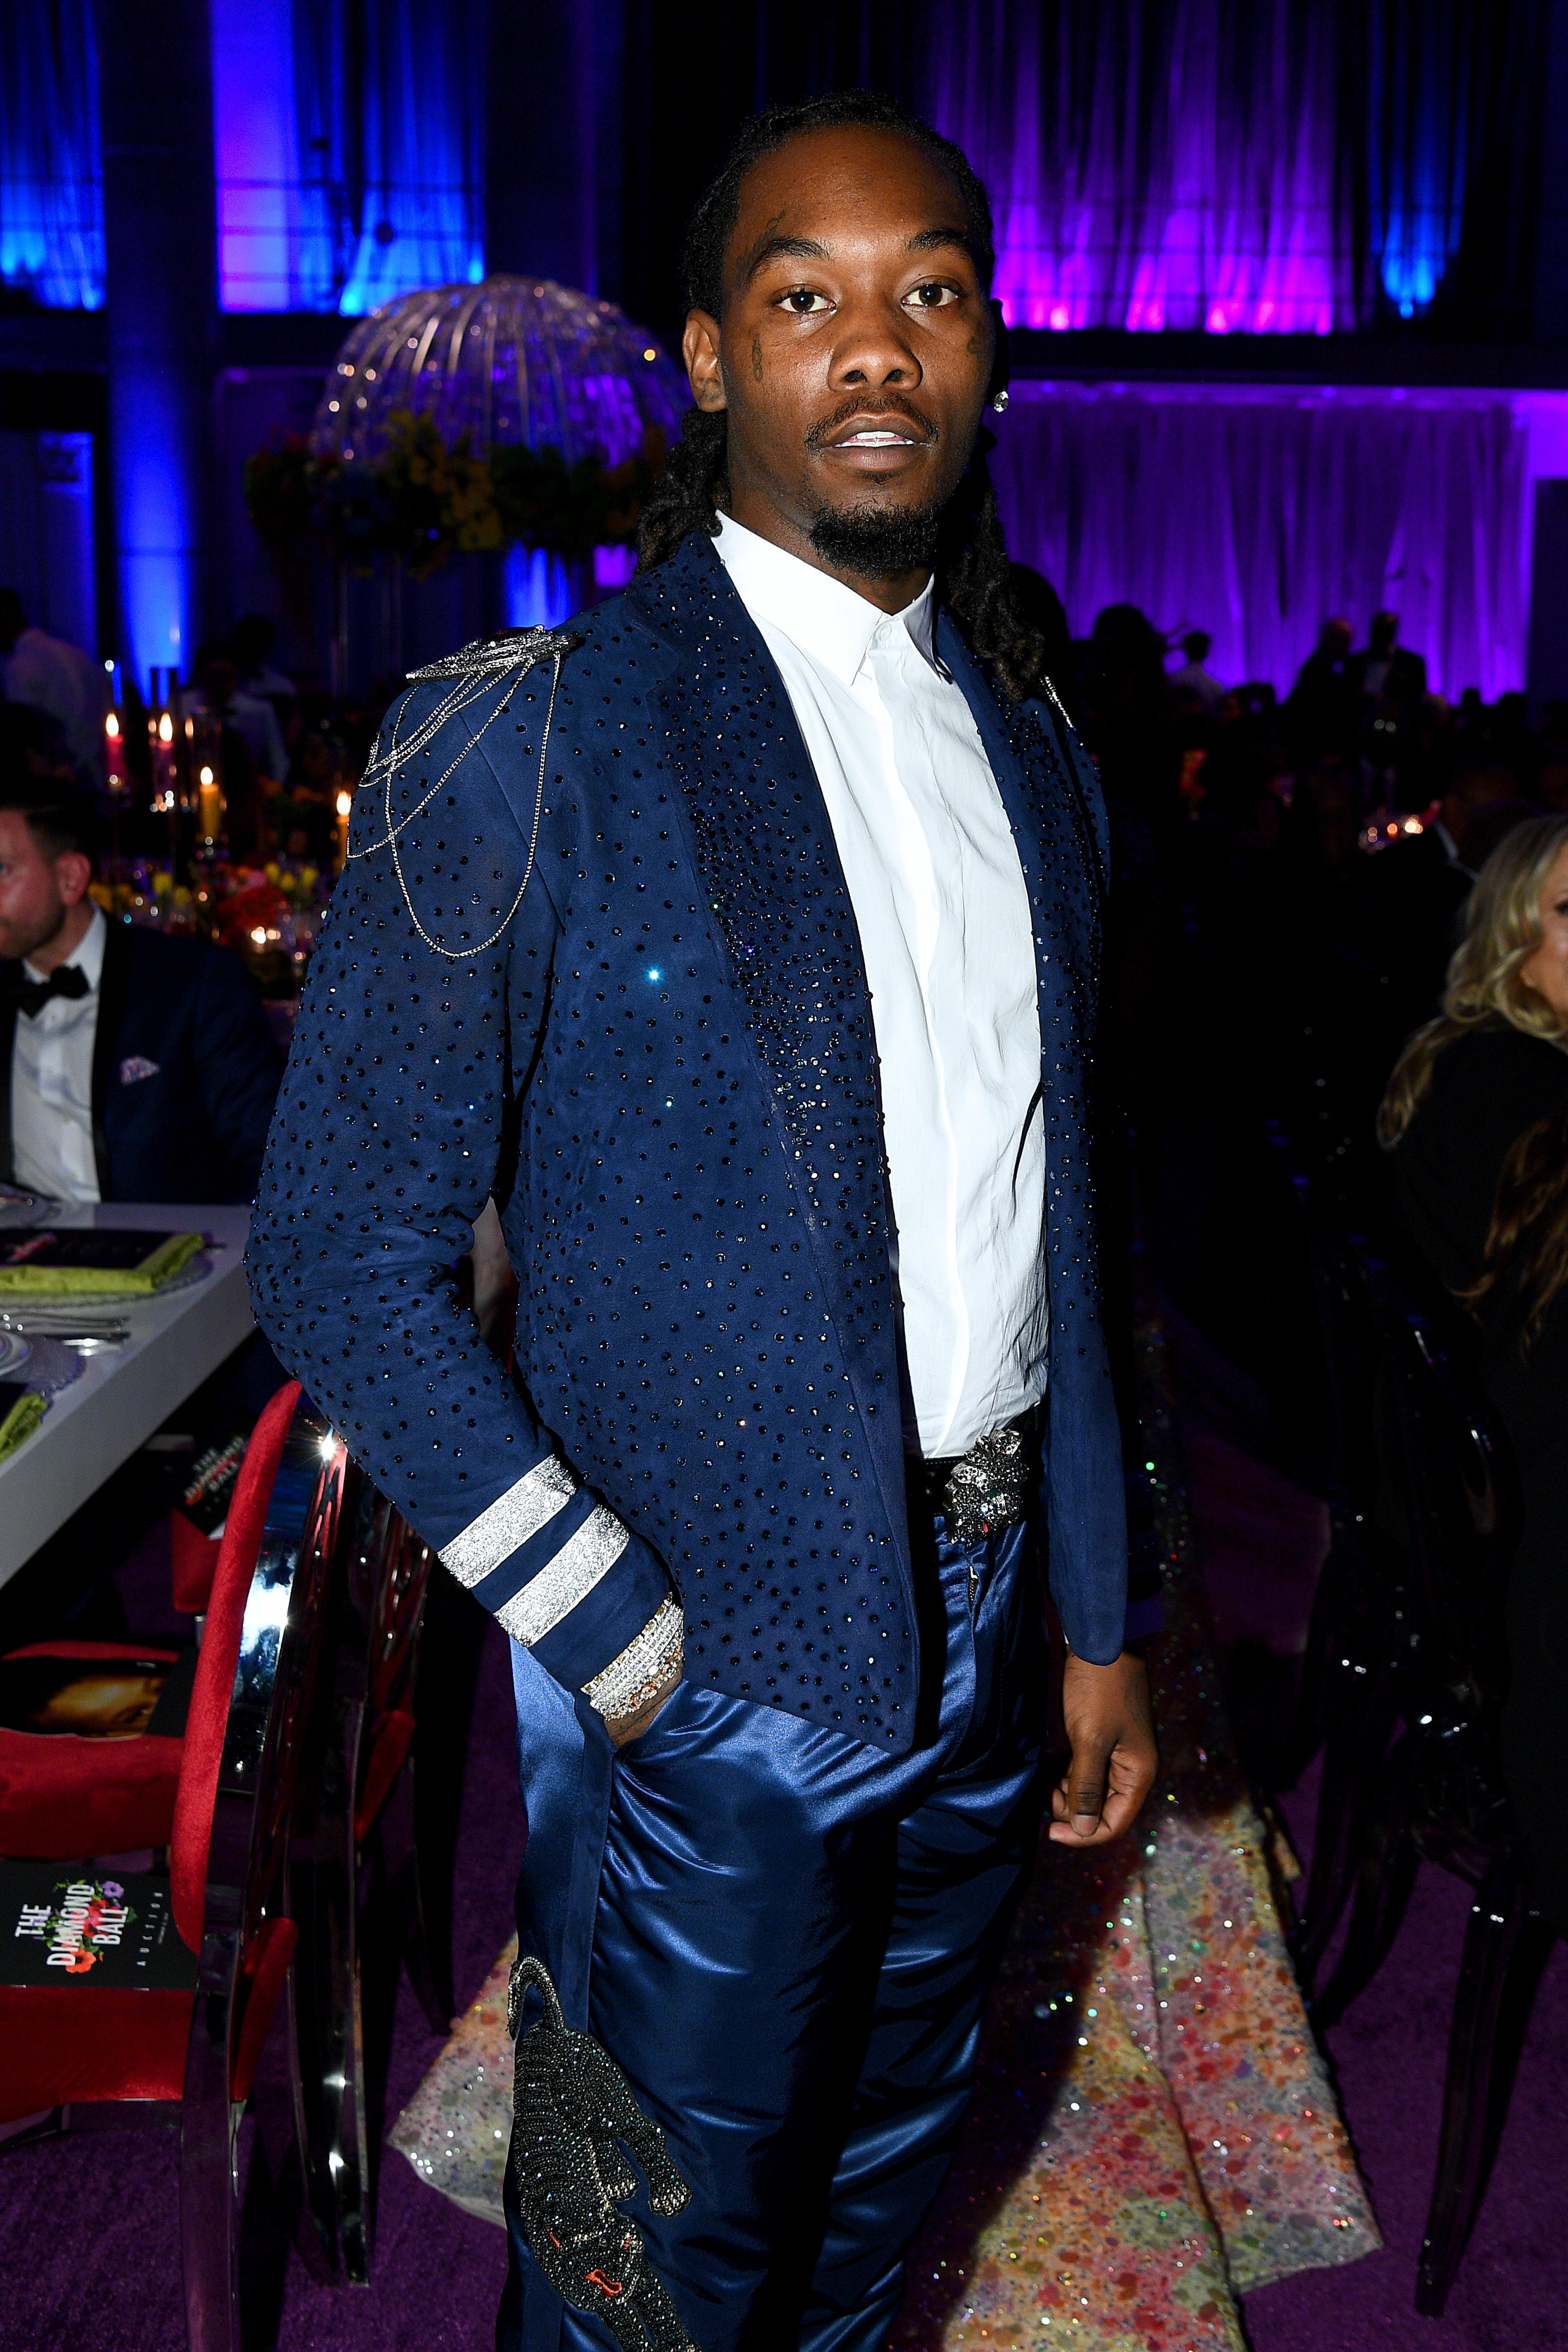 Offset attends Rihanna's 5th Annual Diamond Ball in New York City on September 12, 2019 | Photo: Getty Images